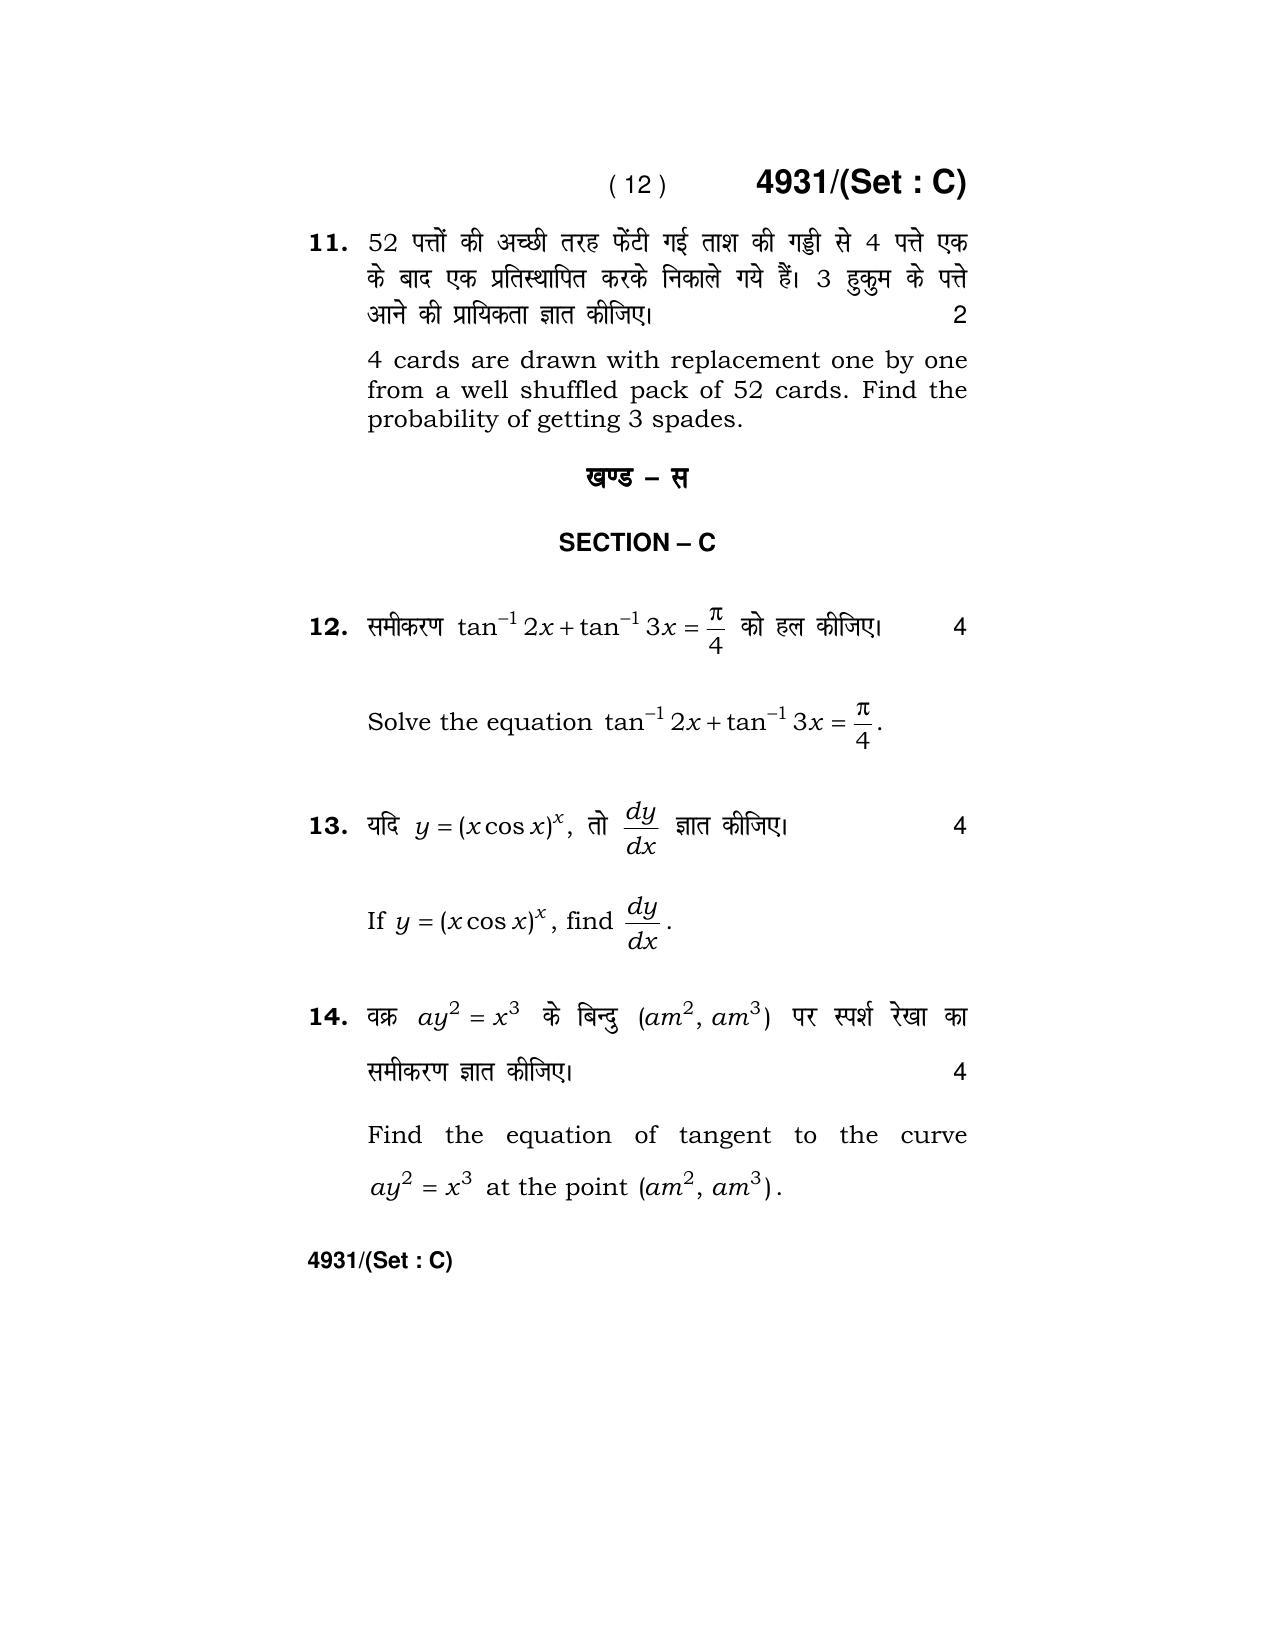 Haryana Board HBSE Class 12 Mathematics 2020 Question Paper - Page 44